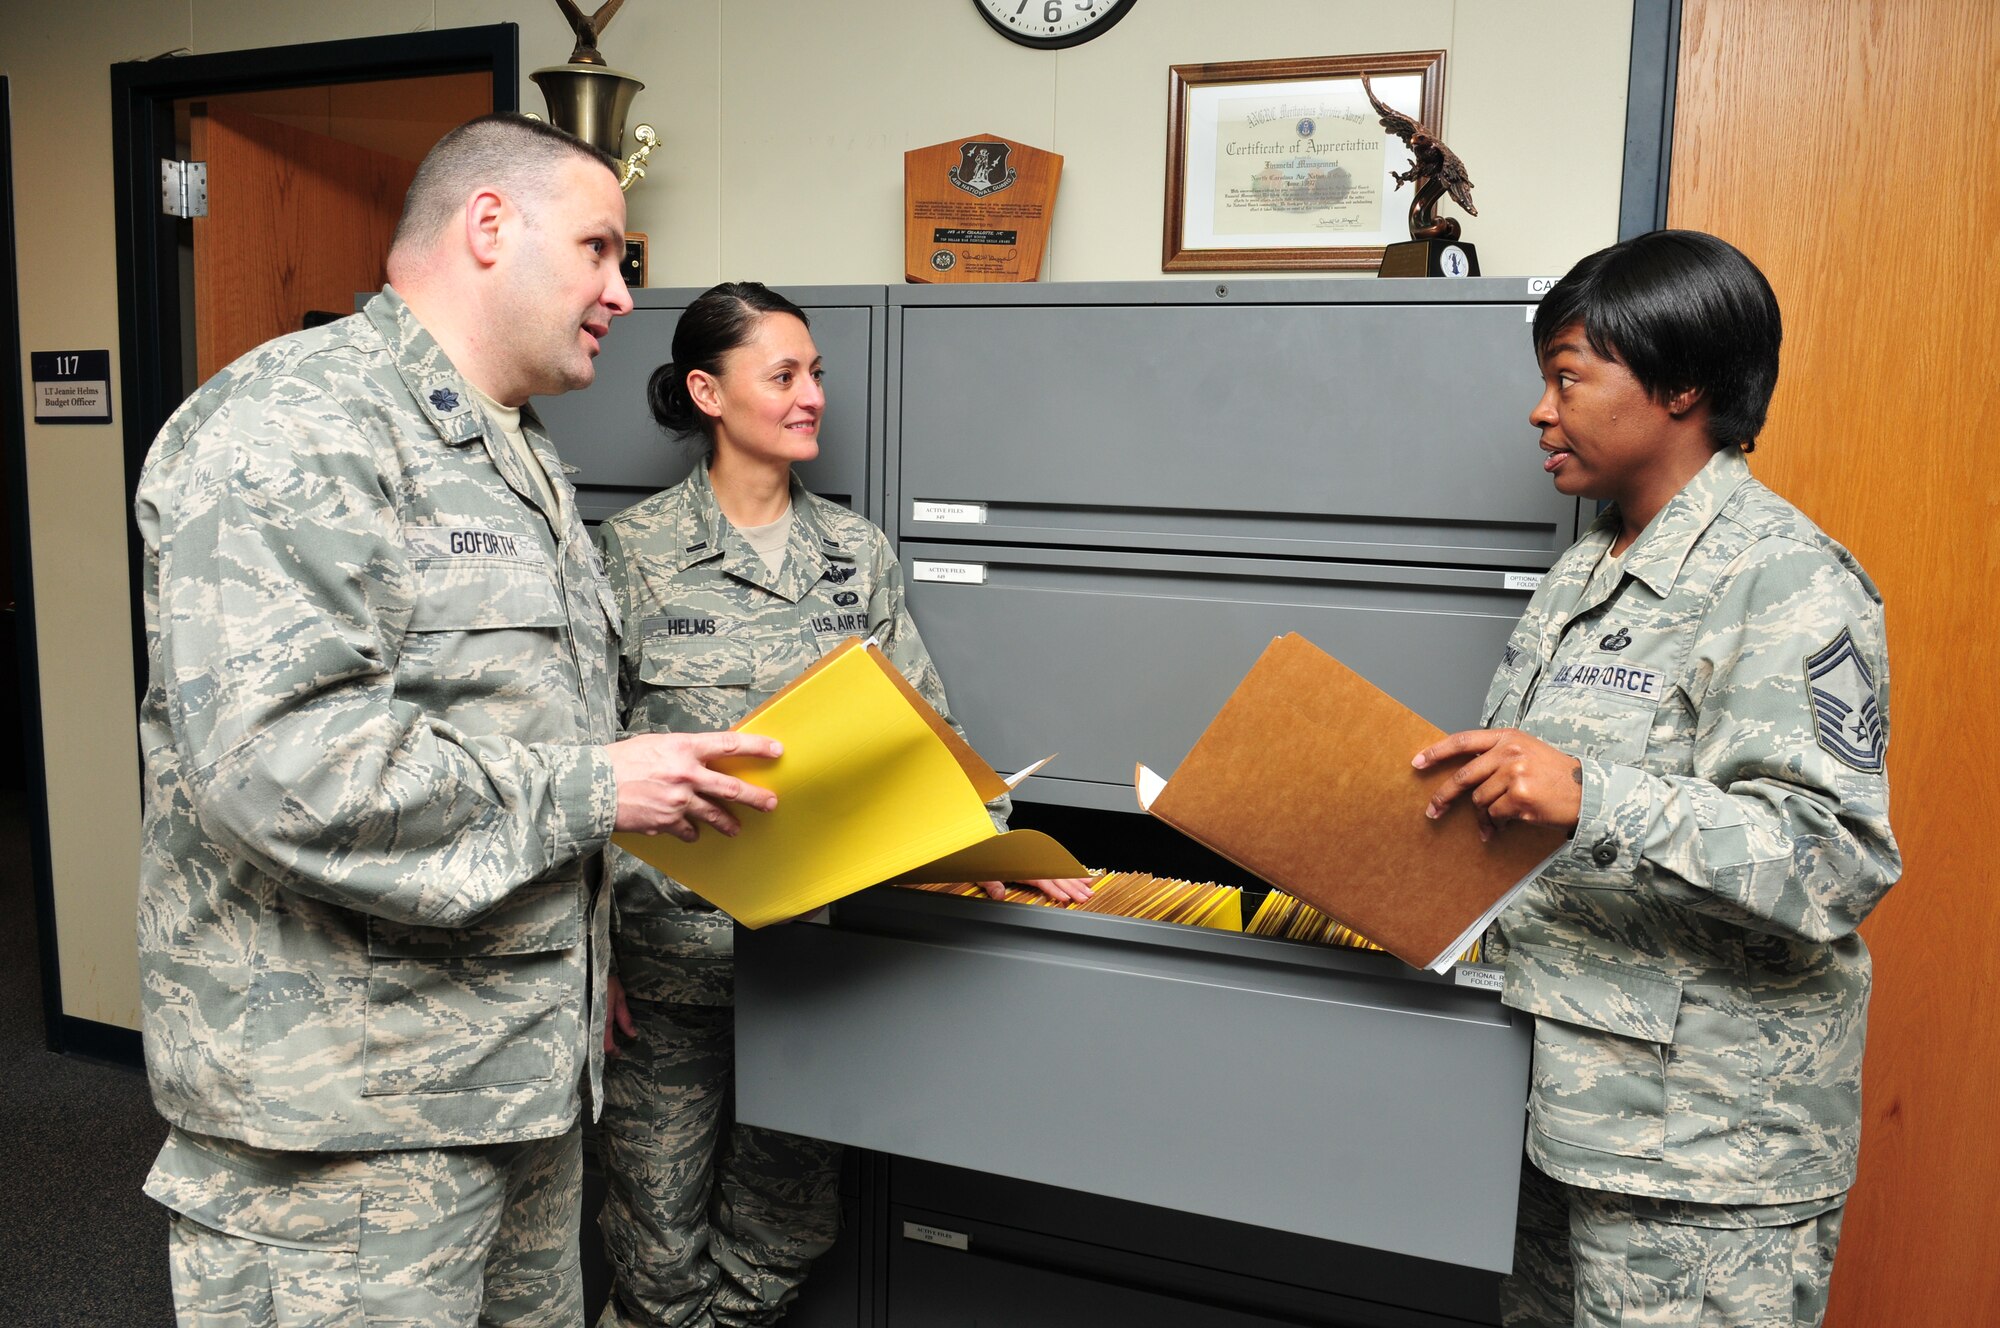 Lt. Col. Gregory Goforth discusses accounting files with fellow 2011 NGB award winners from the 145 Comptroller Flight, (l-r) 1st Lt. Jeanie Helms and Senior Master Sgt. Latonya McPhail.  Lt. Col. Goforth was recognized as National Guard’s Financial Management Comptroller of the Year, while Lt. Helms received the Guard Bureau award for Financial Management Company Grade Officer and Senior Master Sgt. McPhail copped the Financial Management Superintendent of the year award. Photo by Tech. Sgt. Rich Kerner.